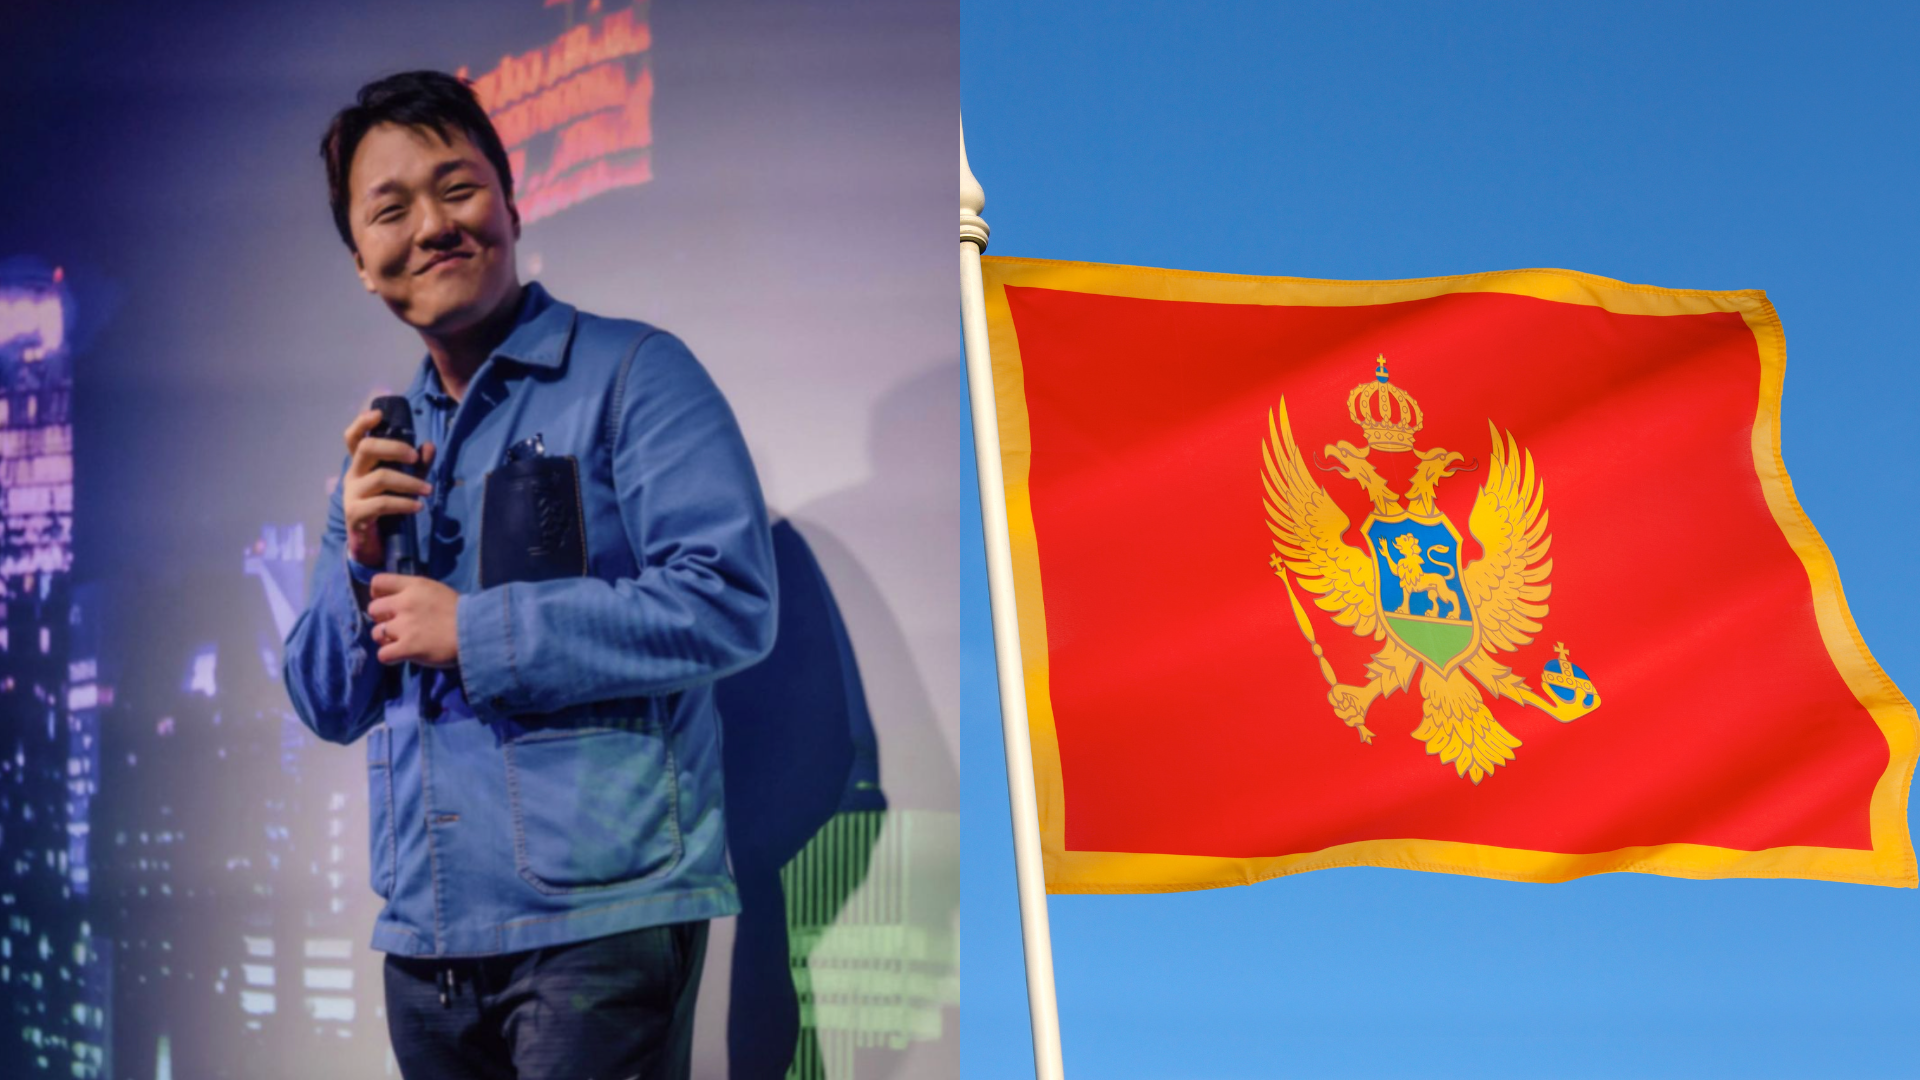 Terraform Labs chief Do Kwon and the flag of Montenegro